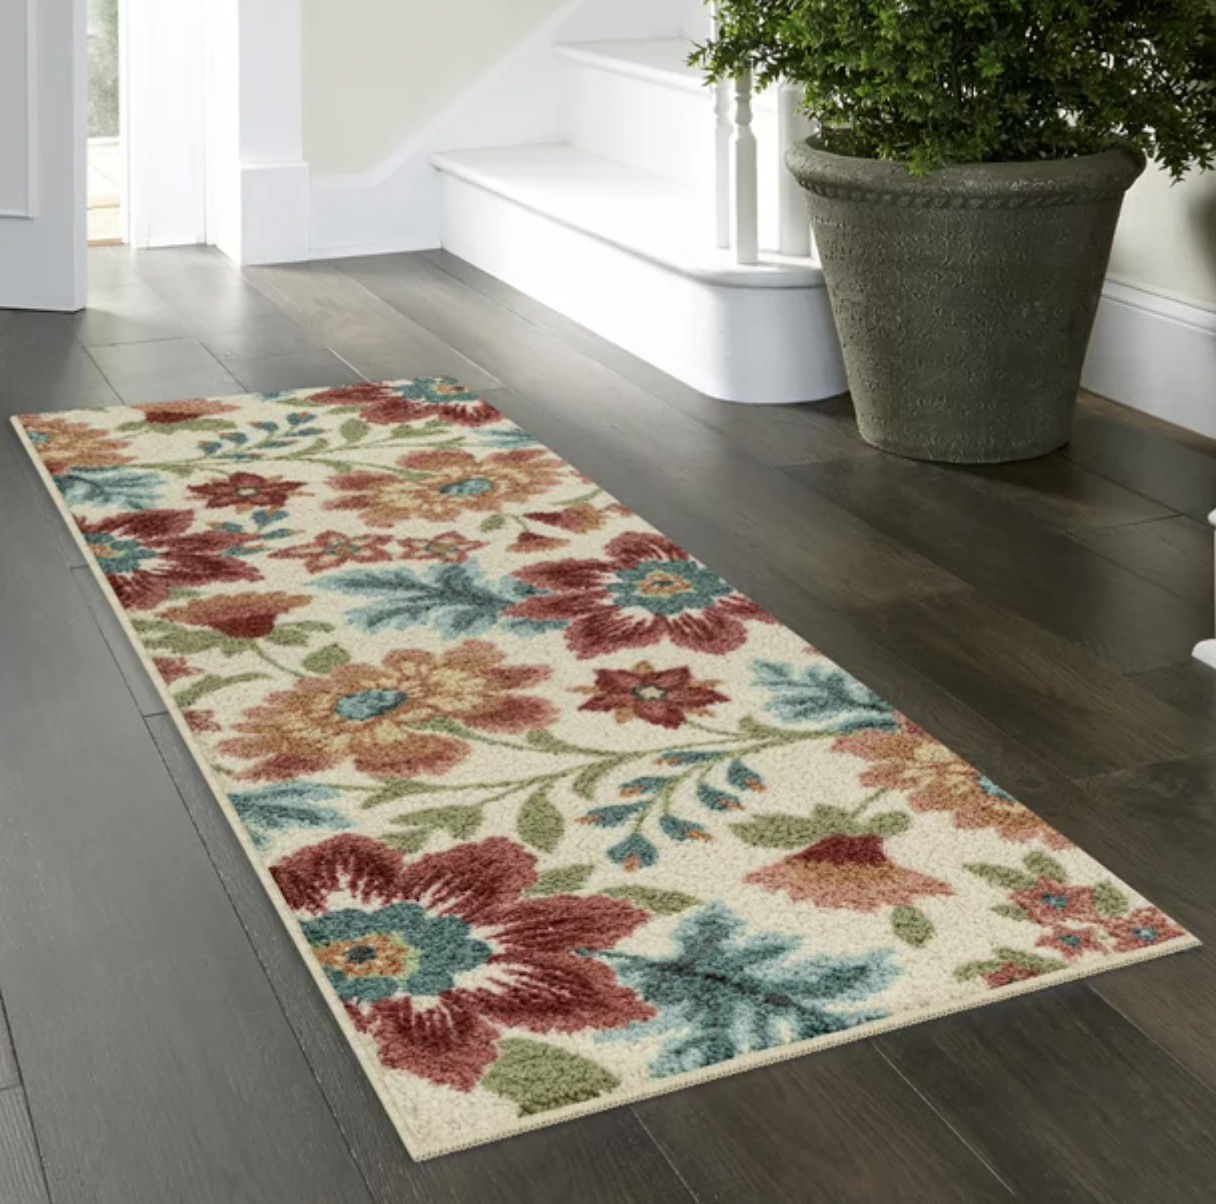 The floral accent runner rug